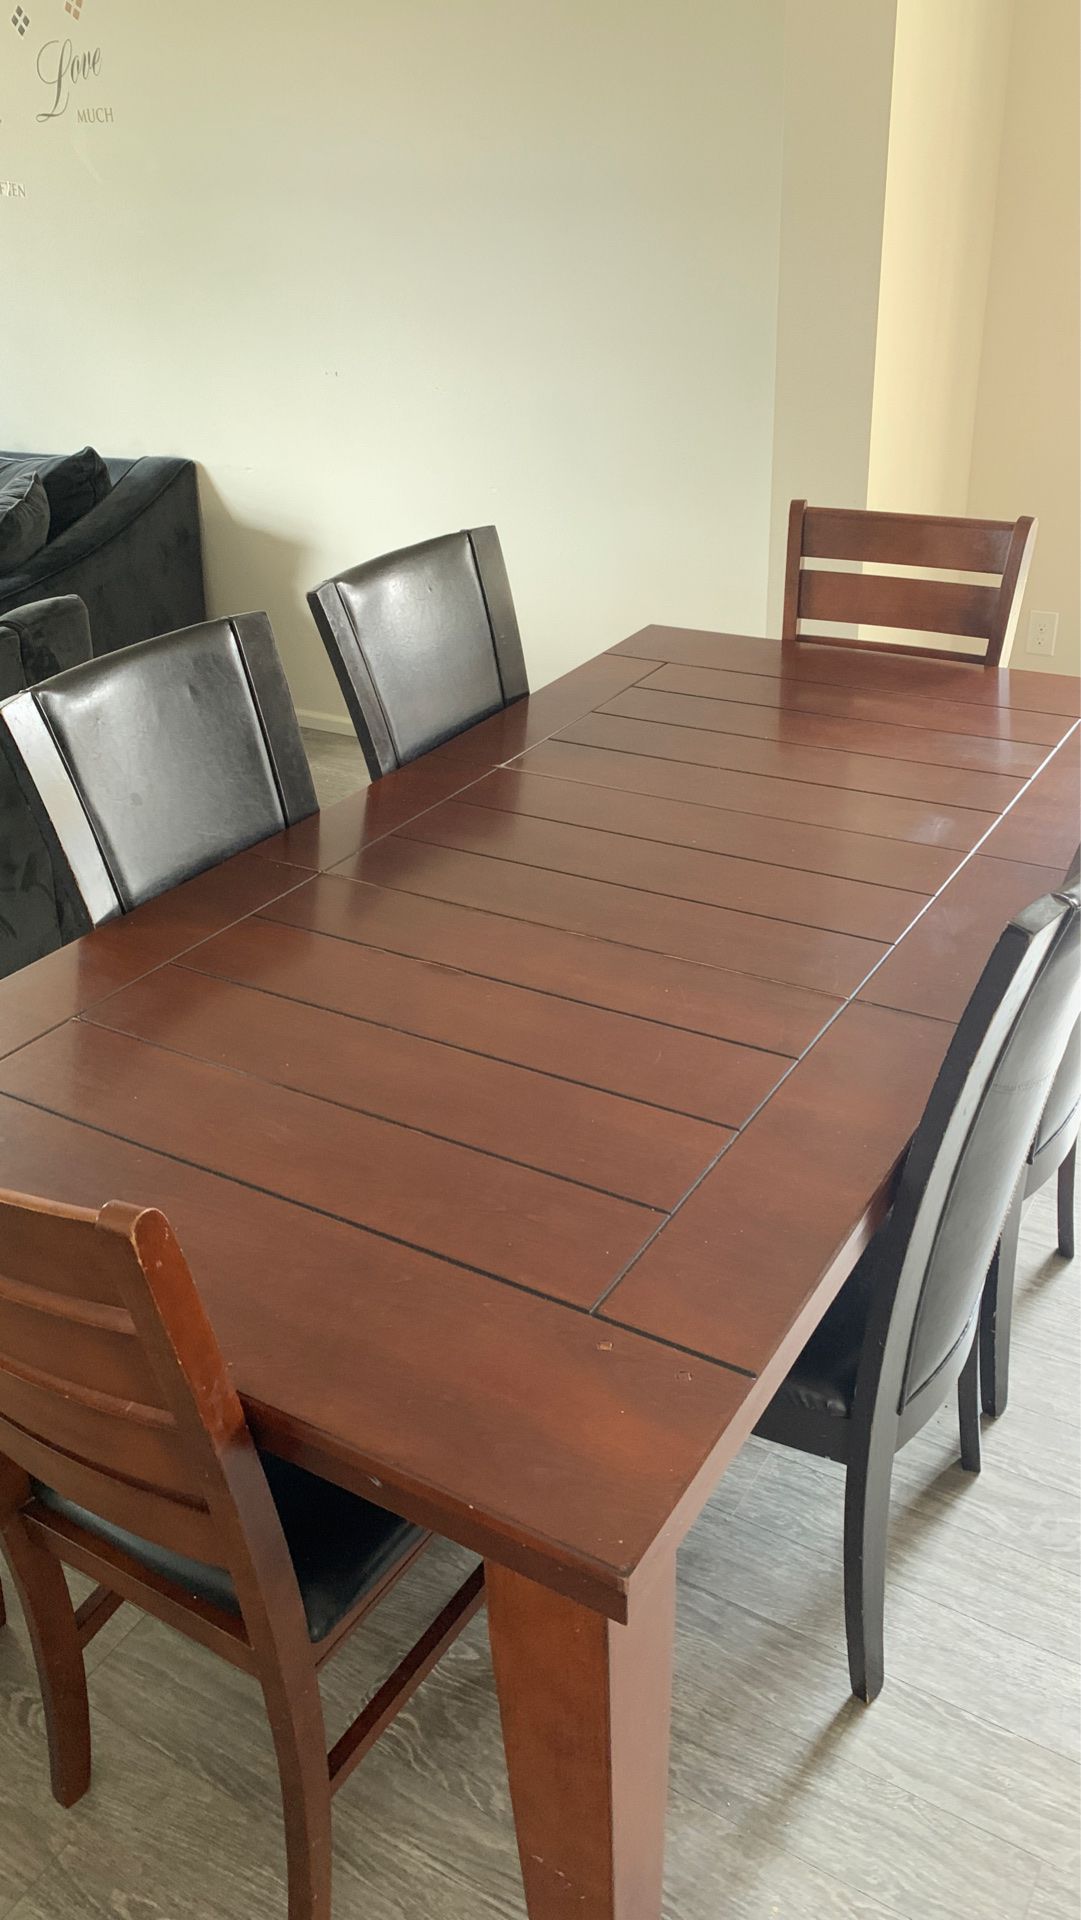 Peding pickup Free table and chairs